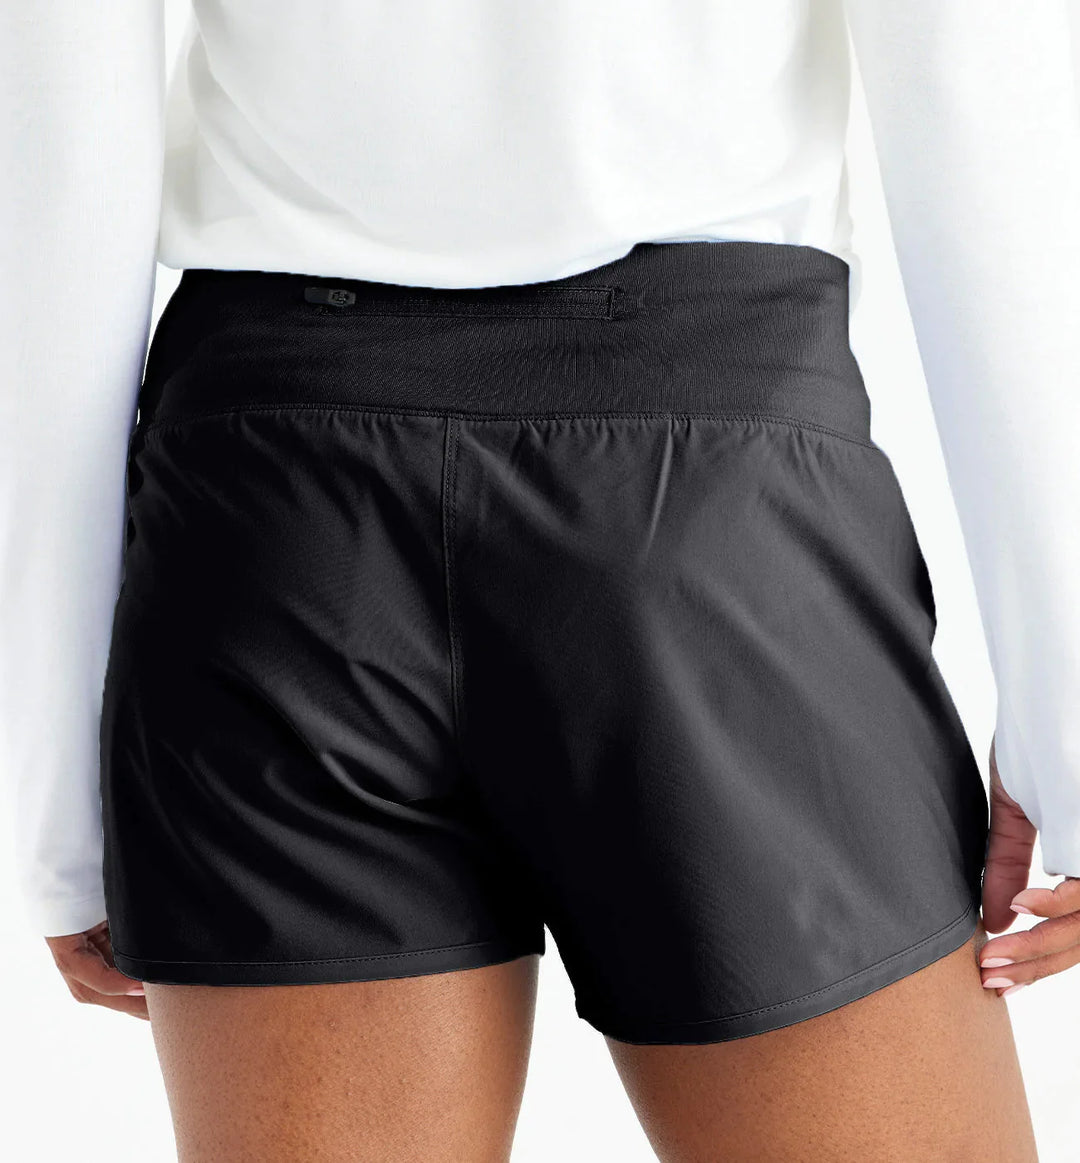 Free Fly Women's Bamboo Lined Breeze Short – 4" in Black